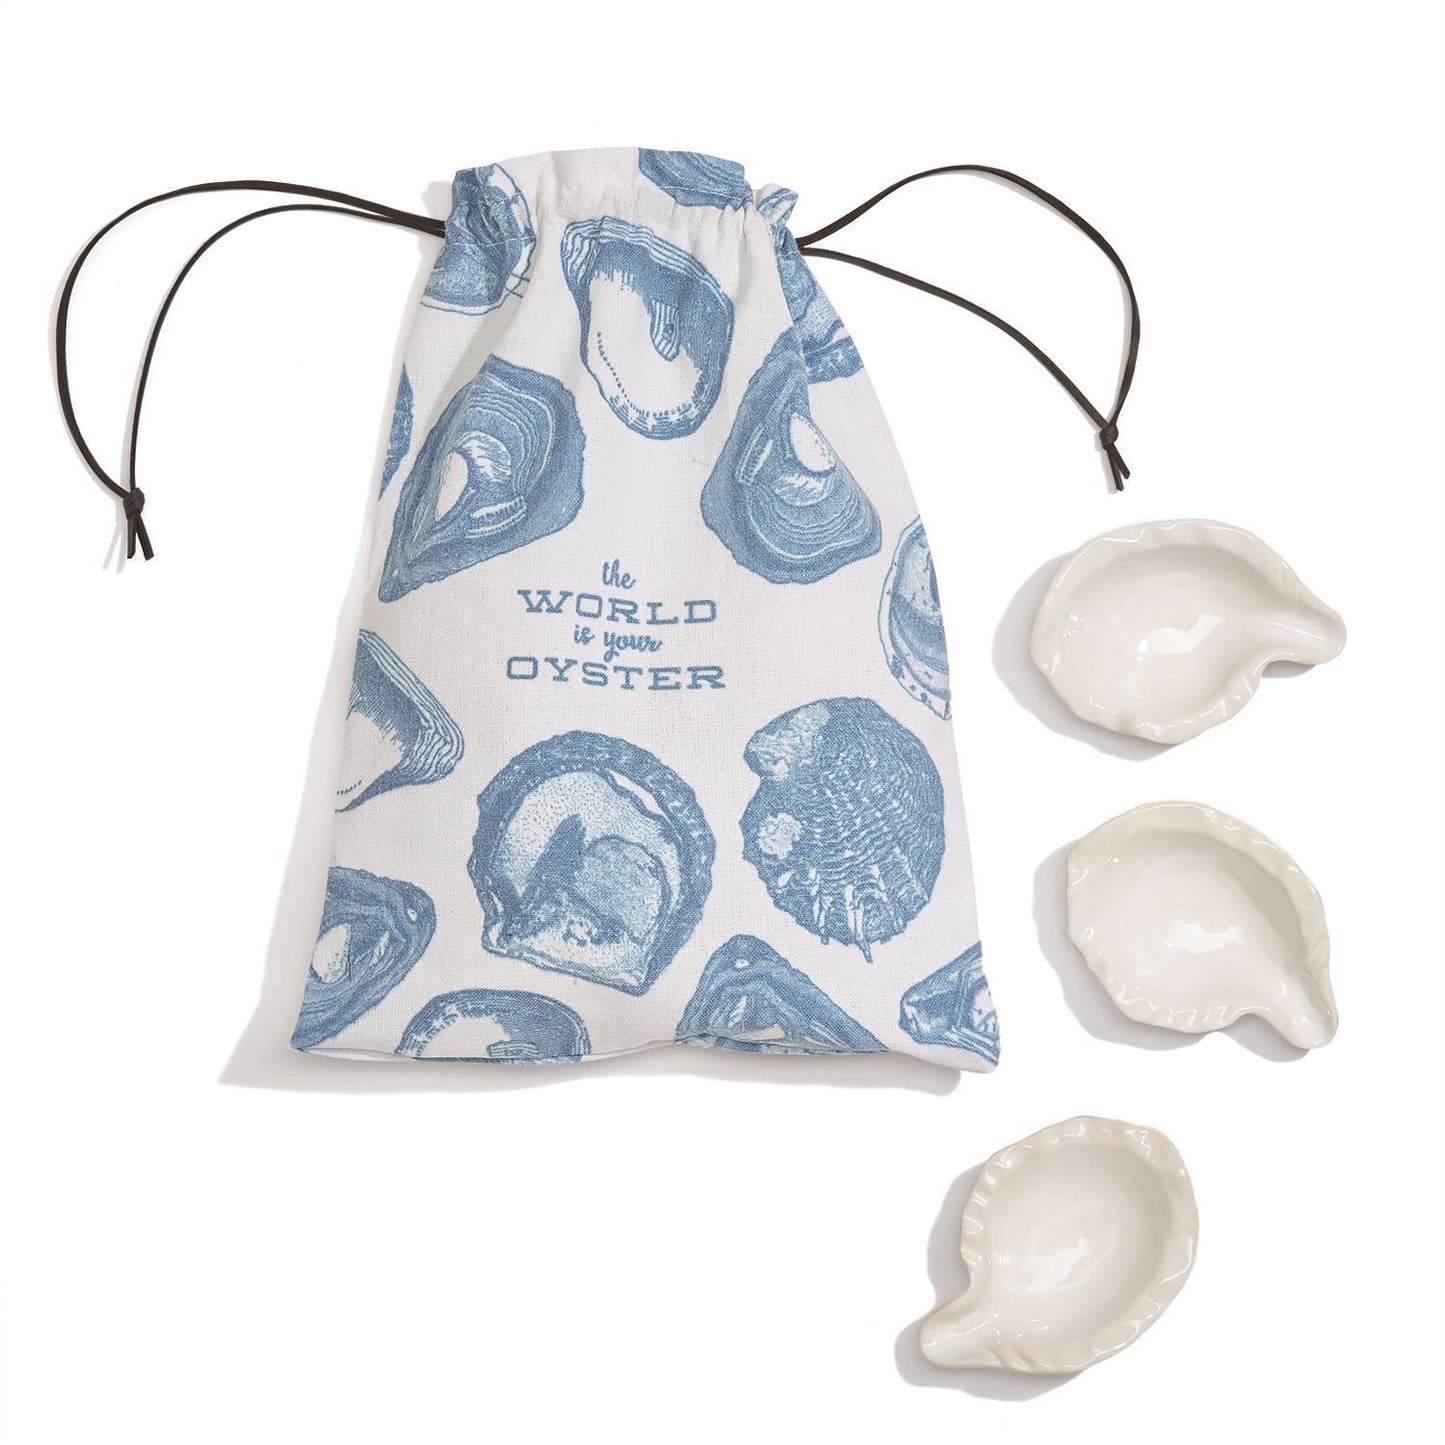 The World is Your Oyster Set of 12 Oyster Bakers in Canvas Pouch